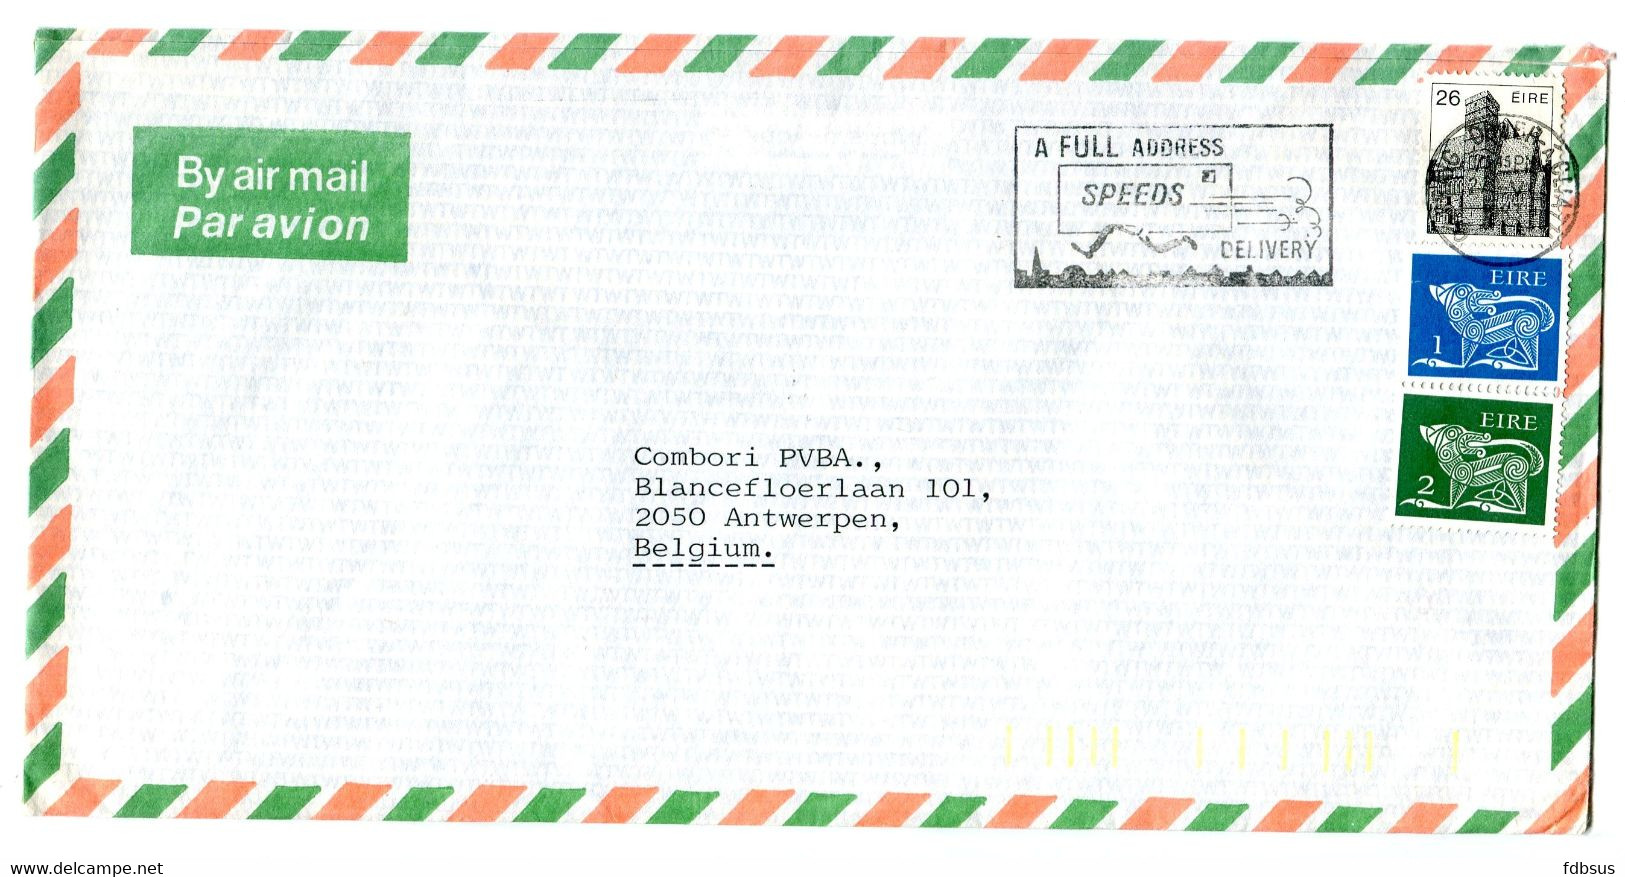 1983 Airmail Cover To Belgium With Nice Slogan In Box A FULL ADDRESS SPEEDS DELIVERY - Covers & Documents